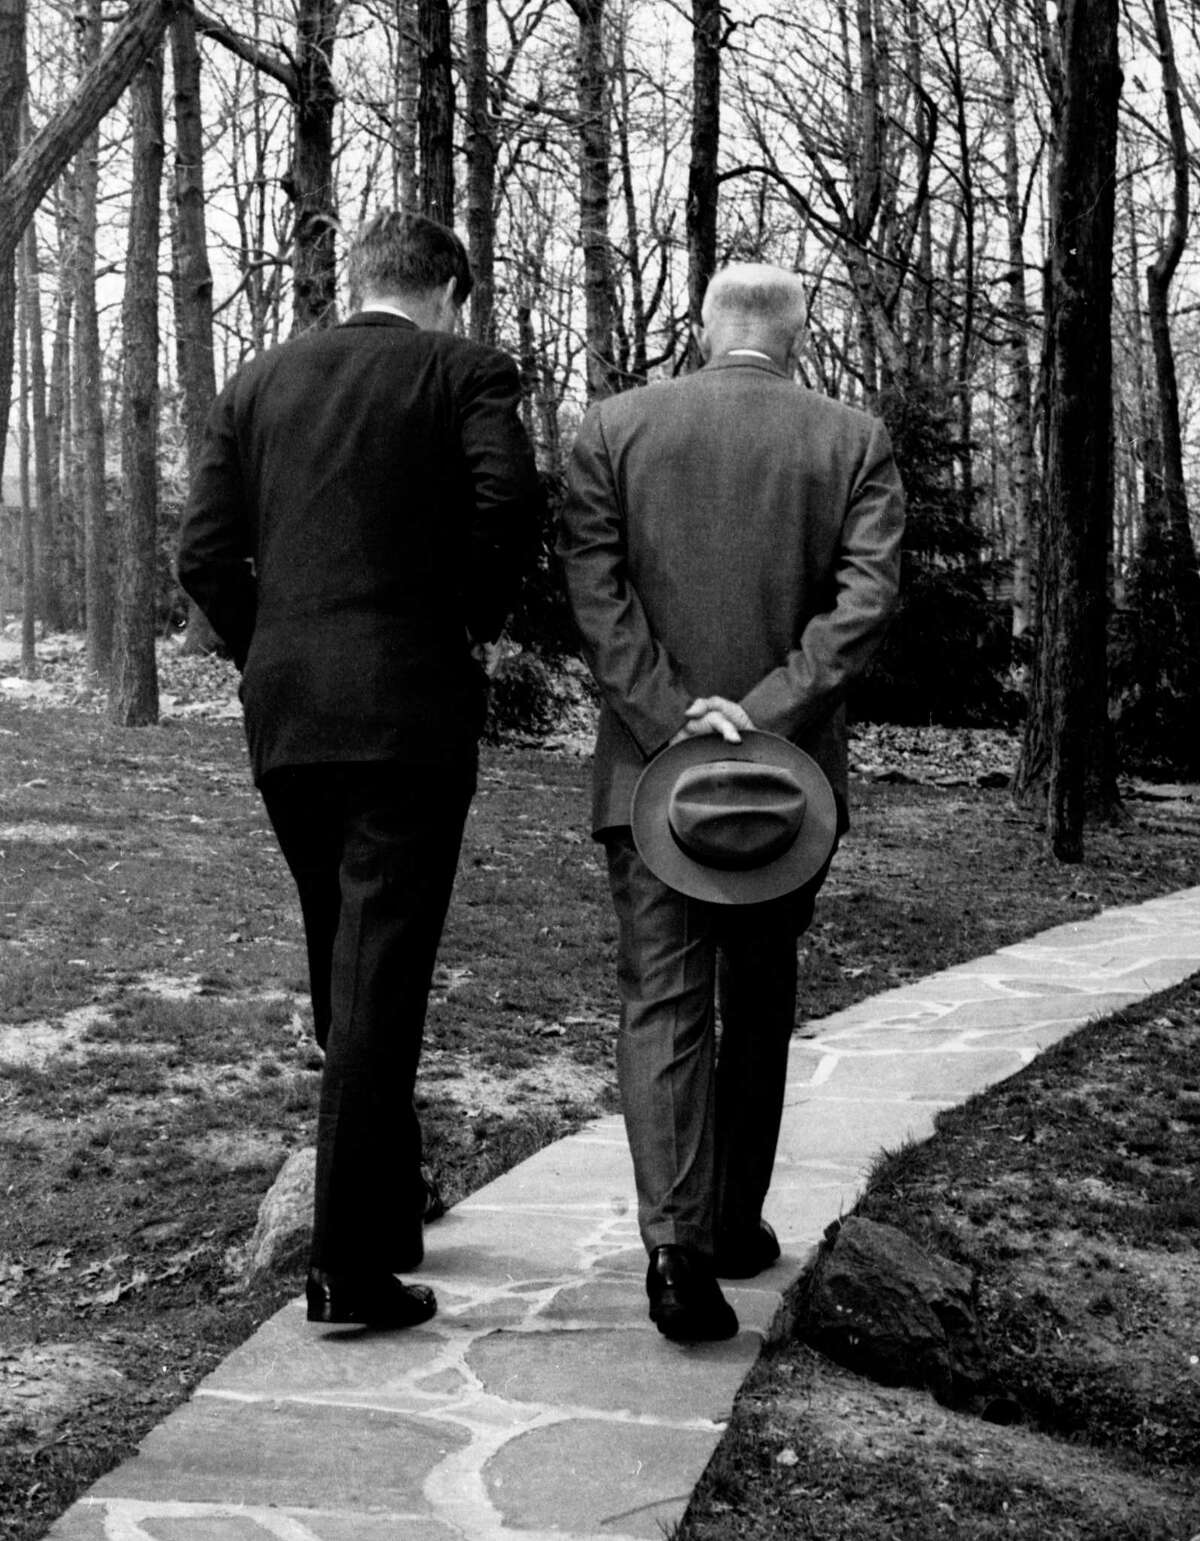 President John F. Kennedy, left, and former President Dwight D. Eisenhower with their heads bowed as they walk along a path at Camp David in Thurmond, Md.